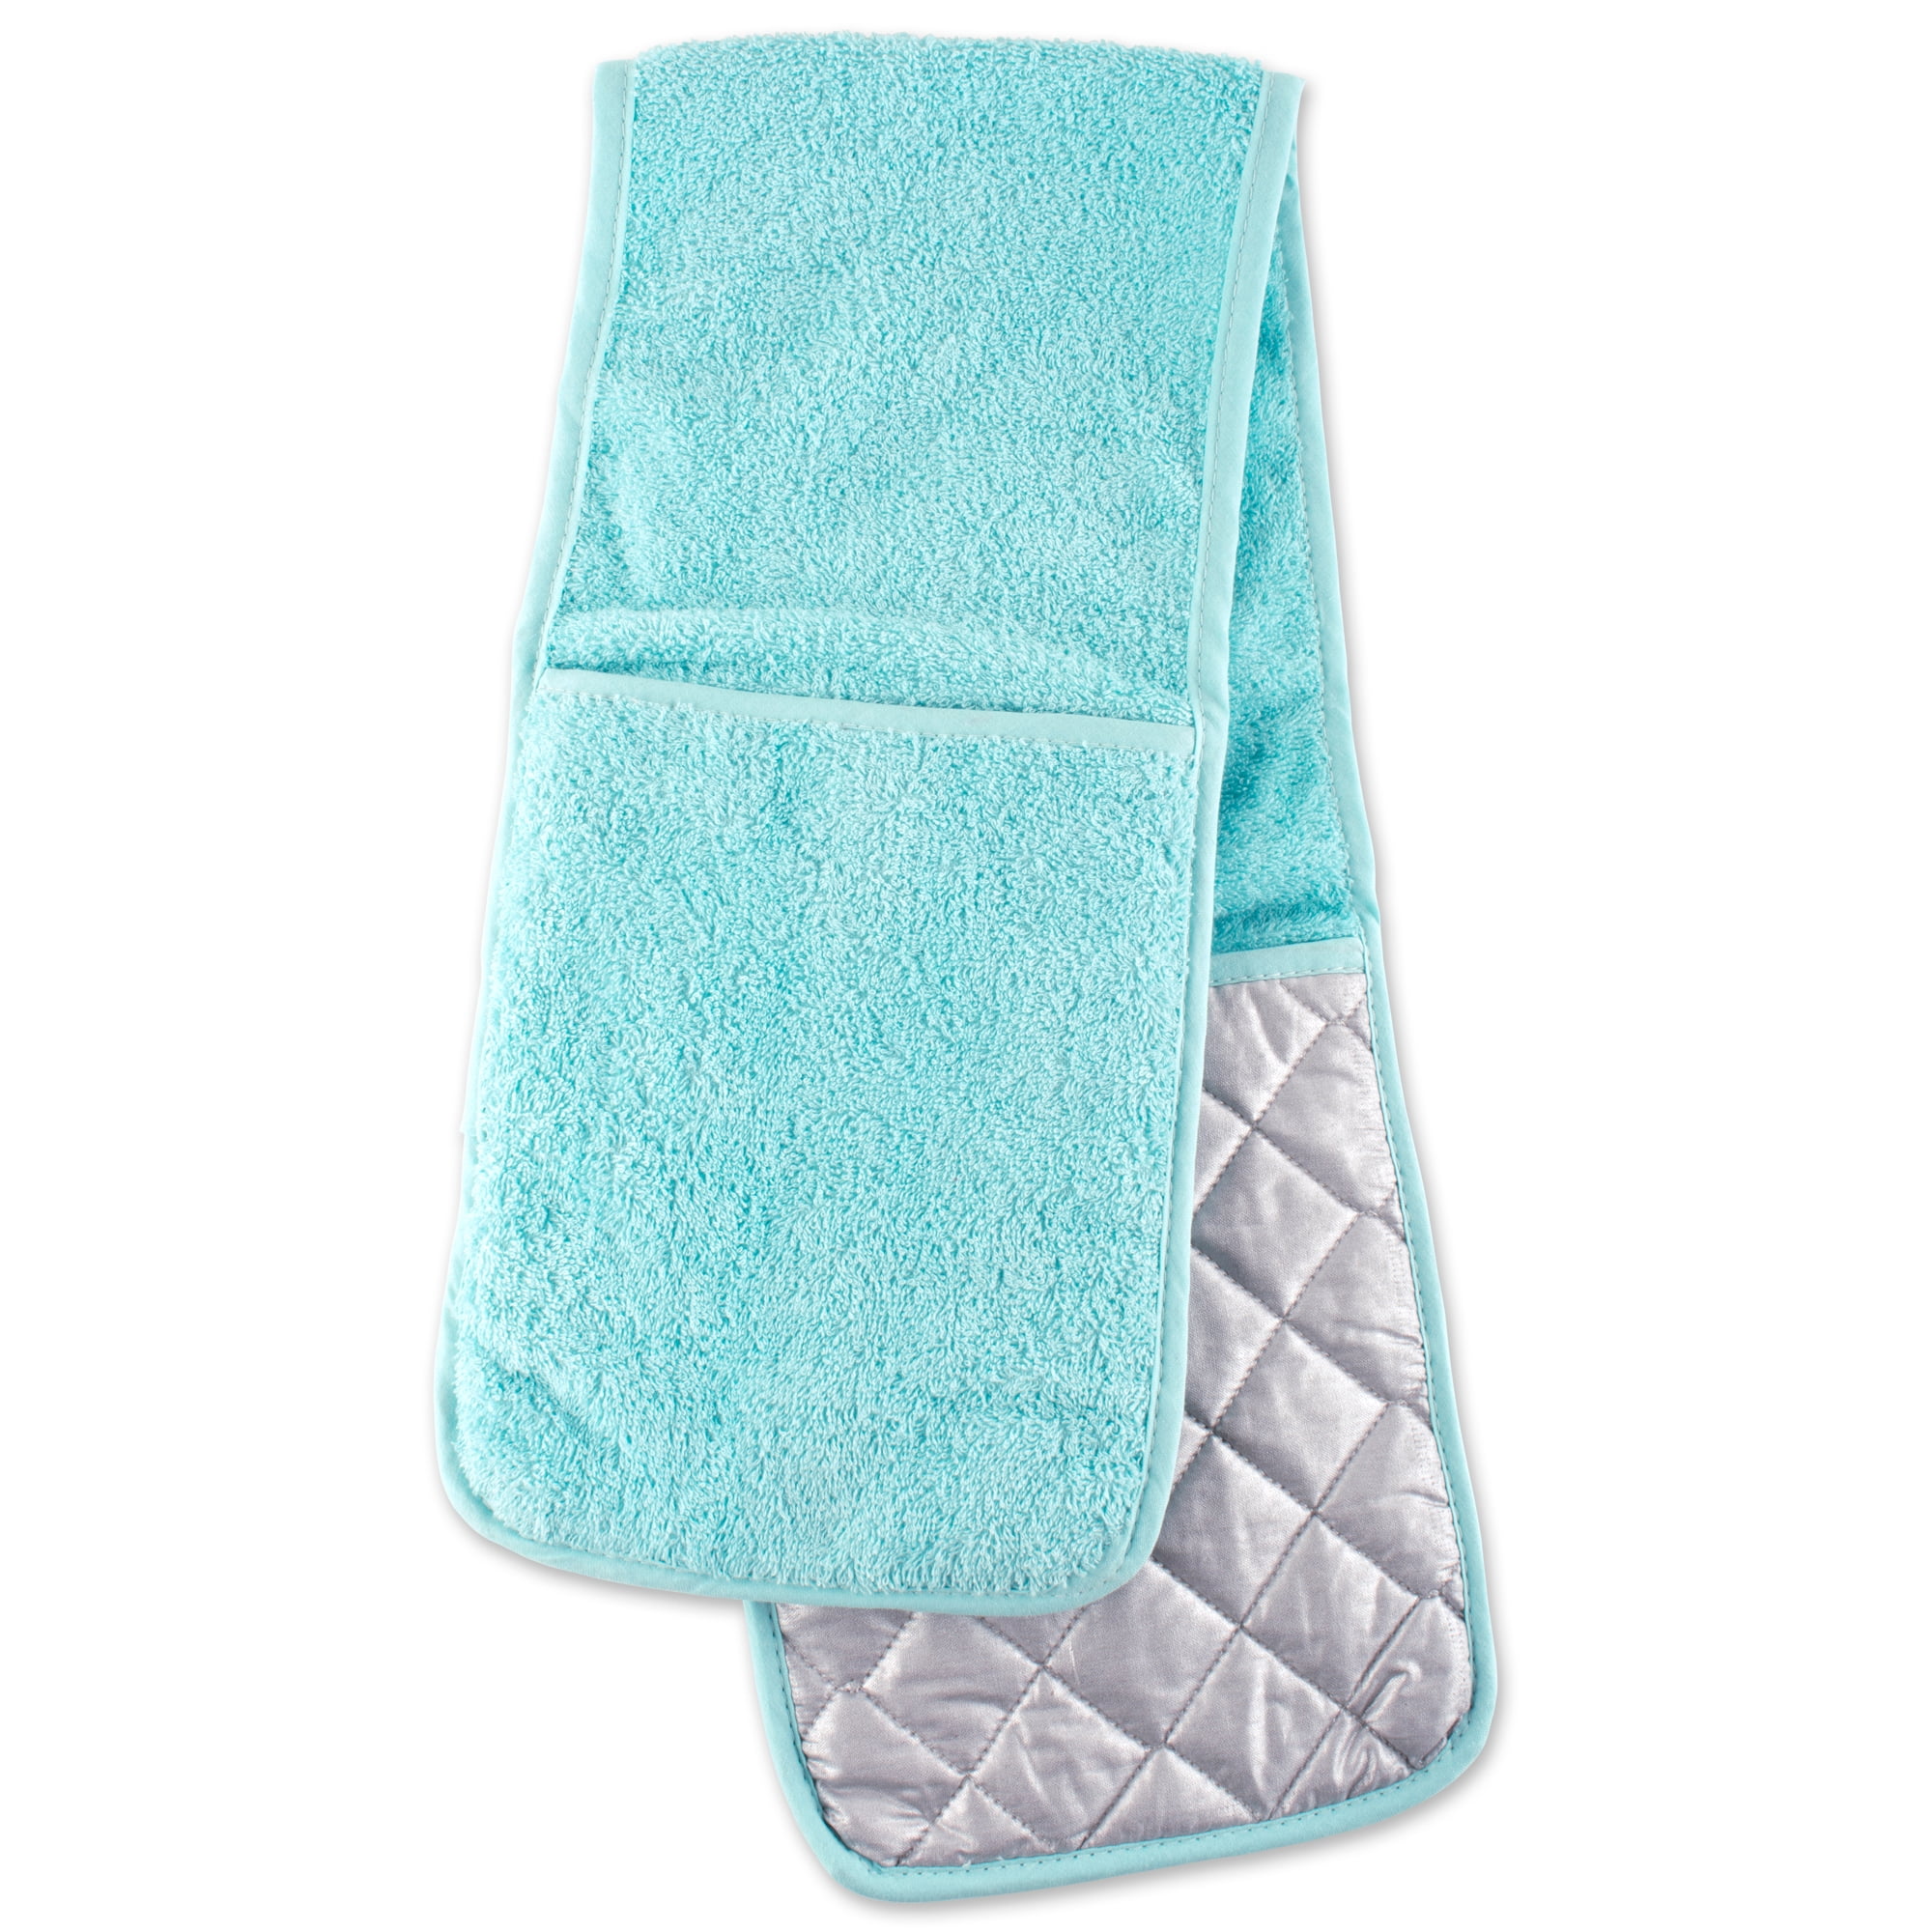 DII Spice Terry Oven Mitt (Set of 2)